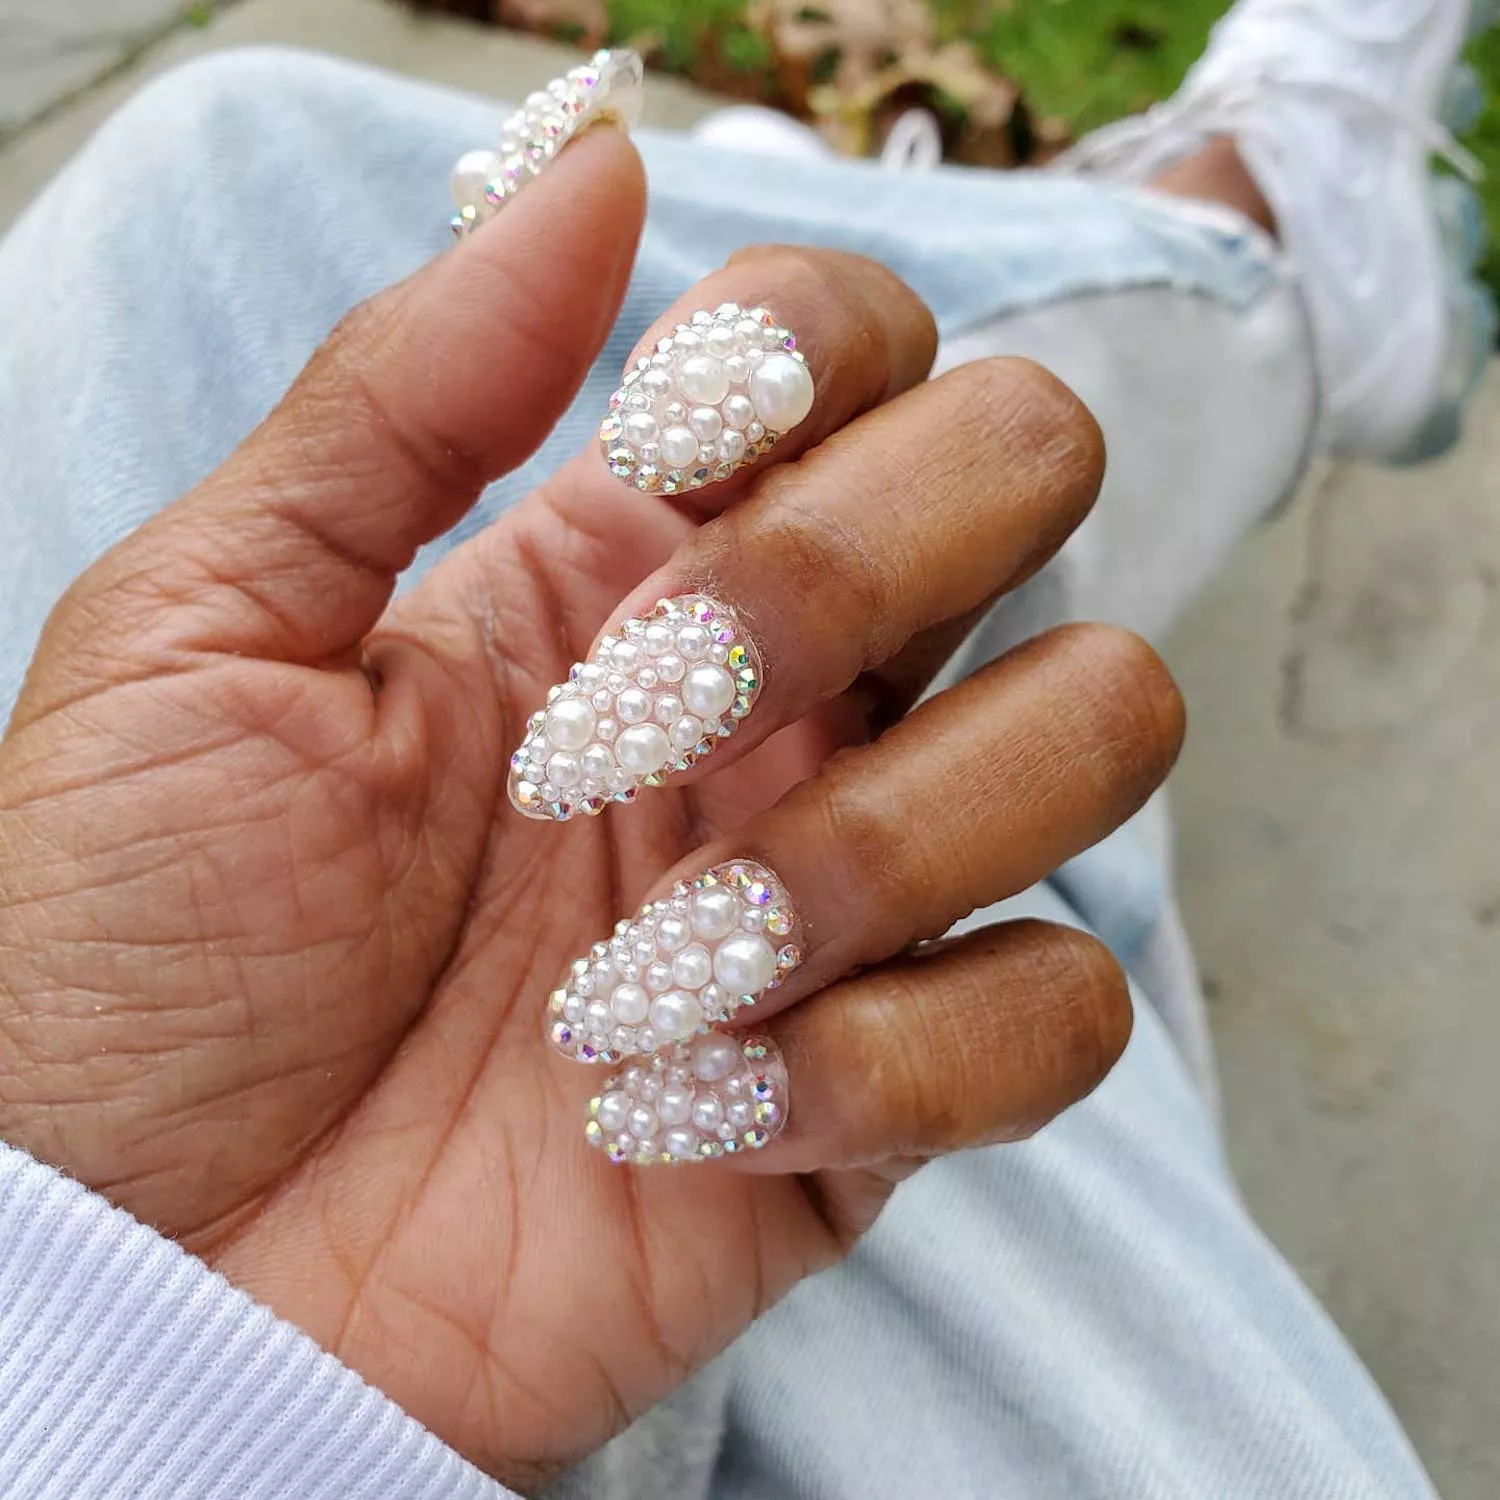 Manicure covered in various sizes of pearls and iridescent studs